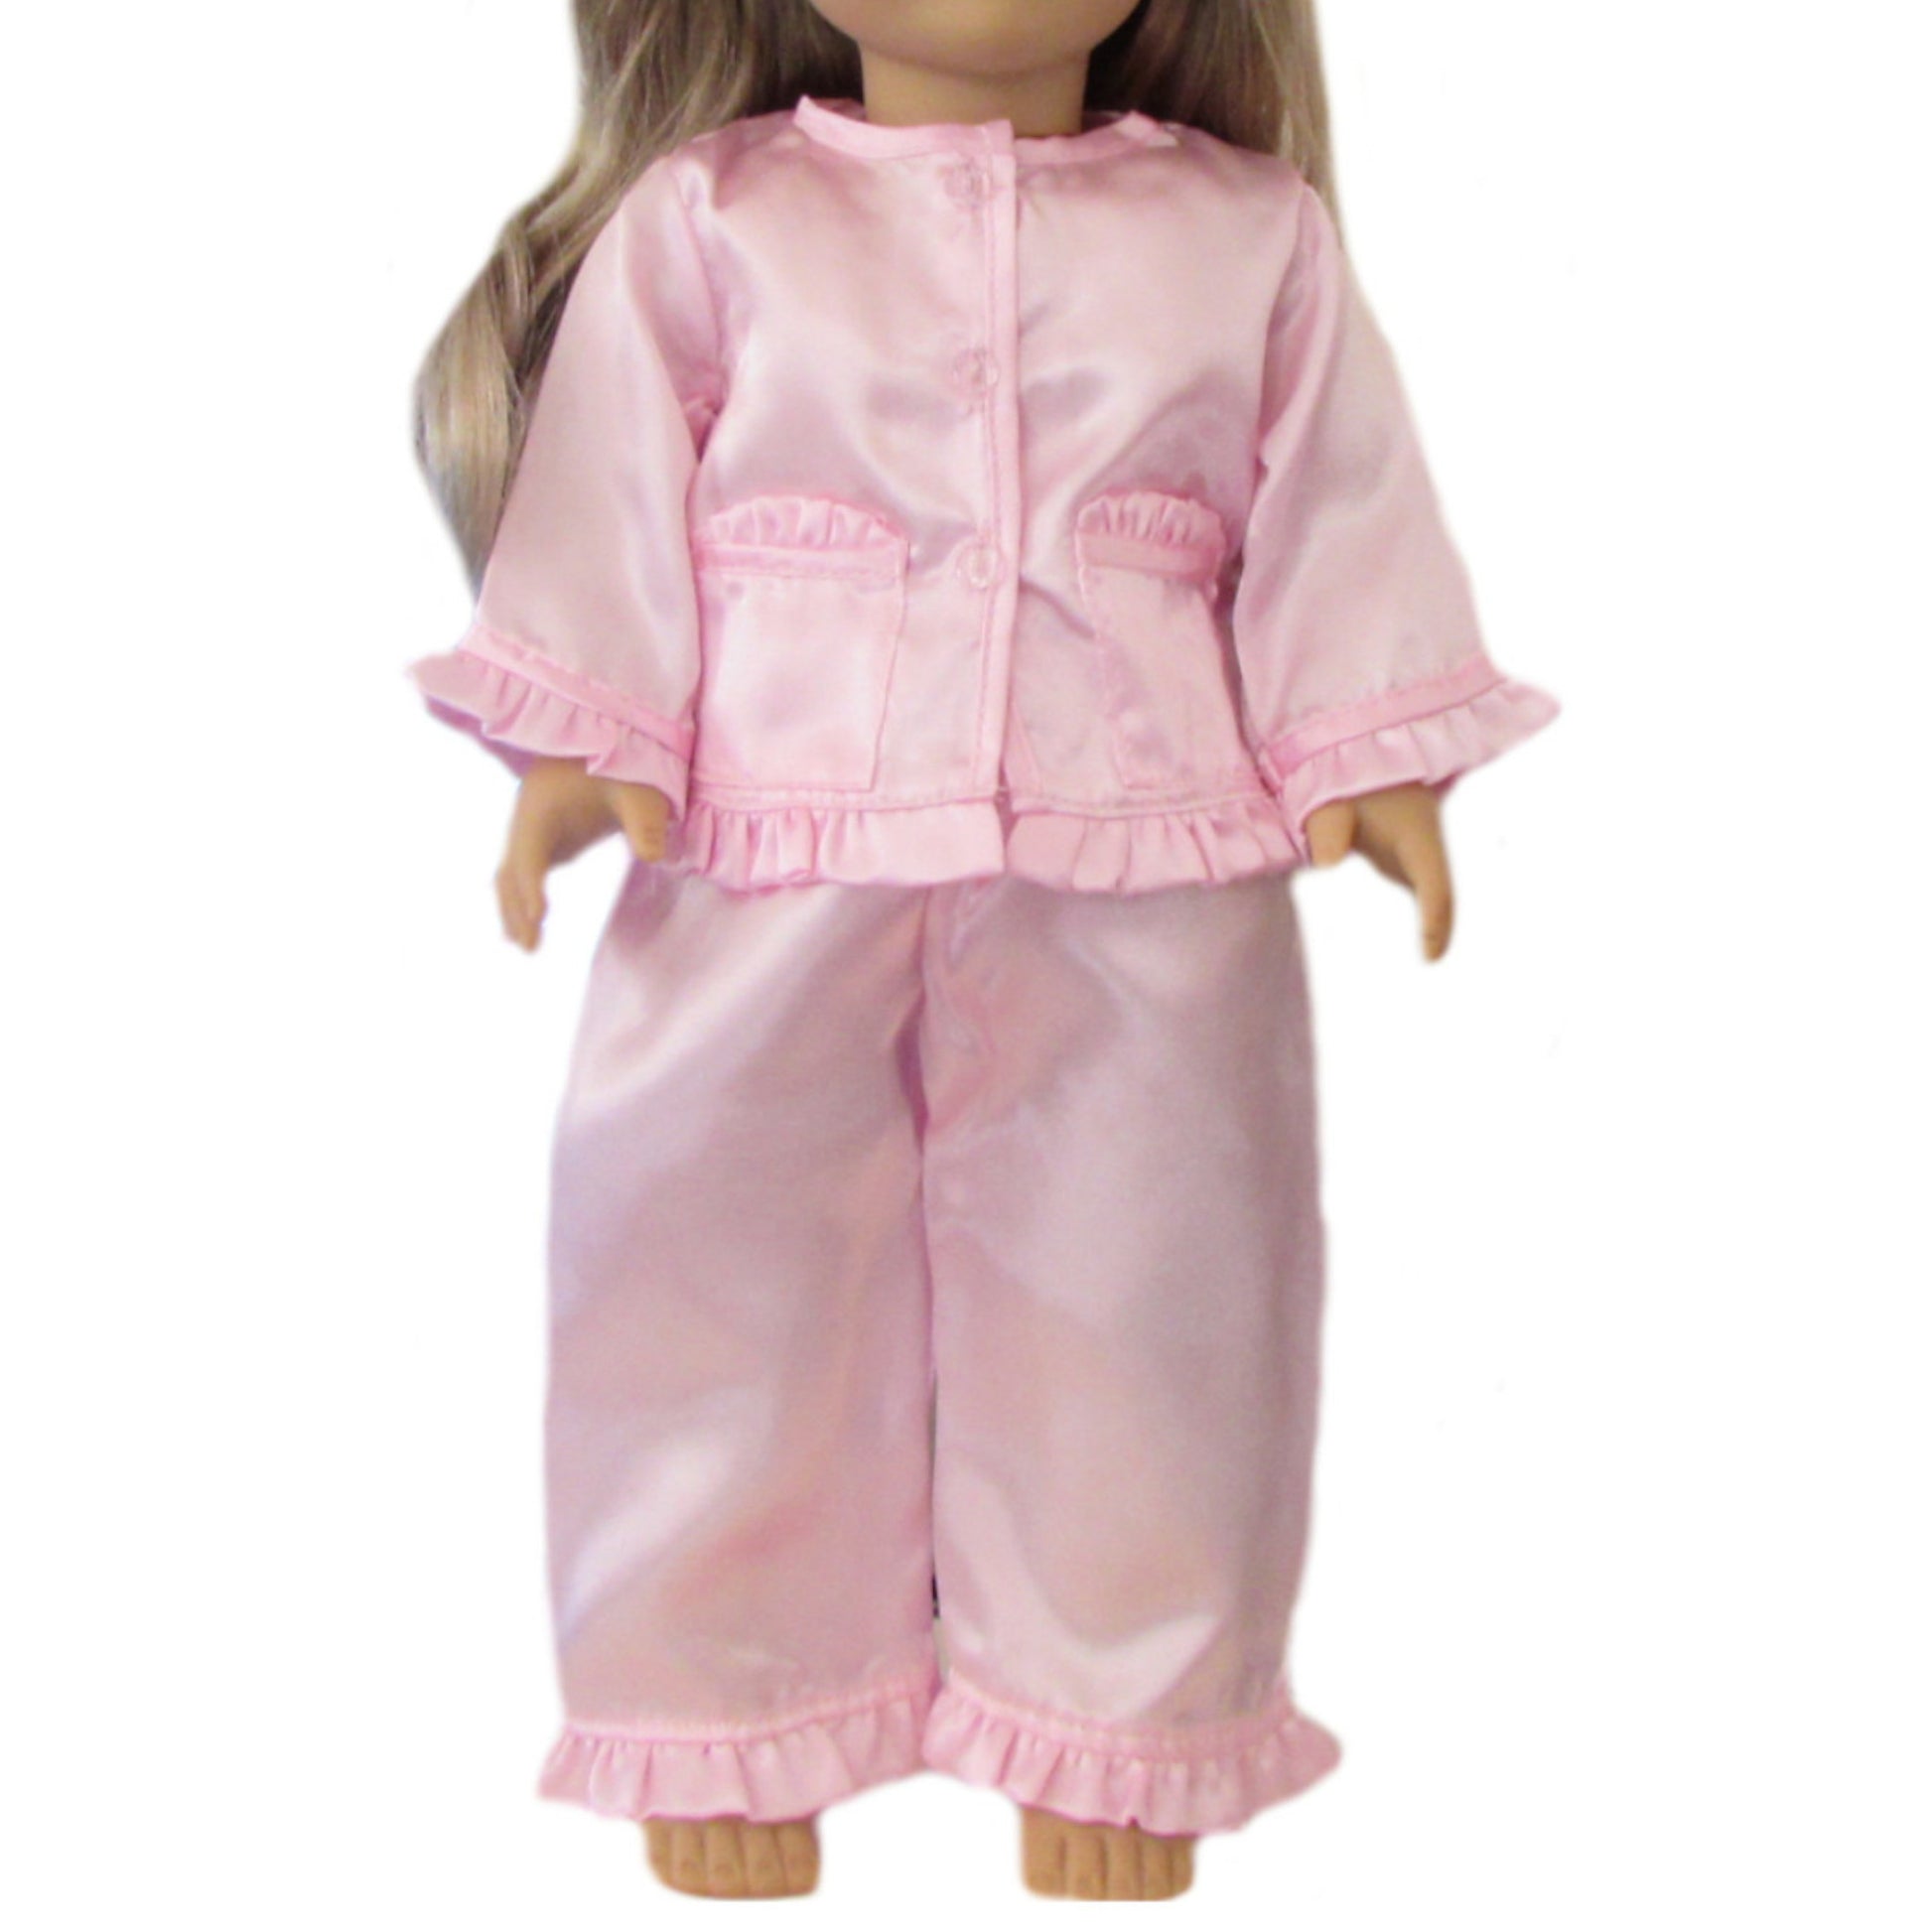 Satin Pajamas with Ruffles for 18-inch dolls with doll